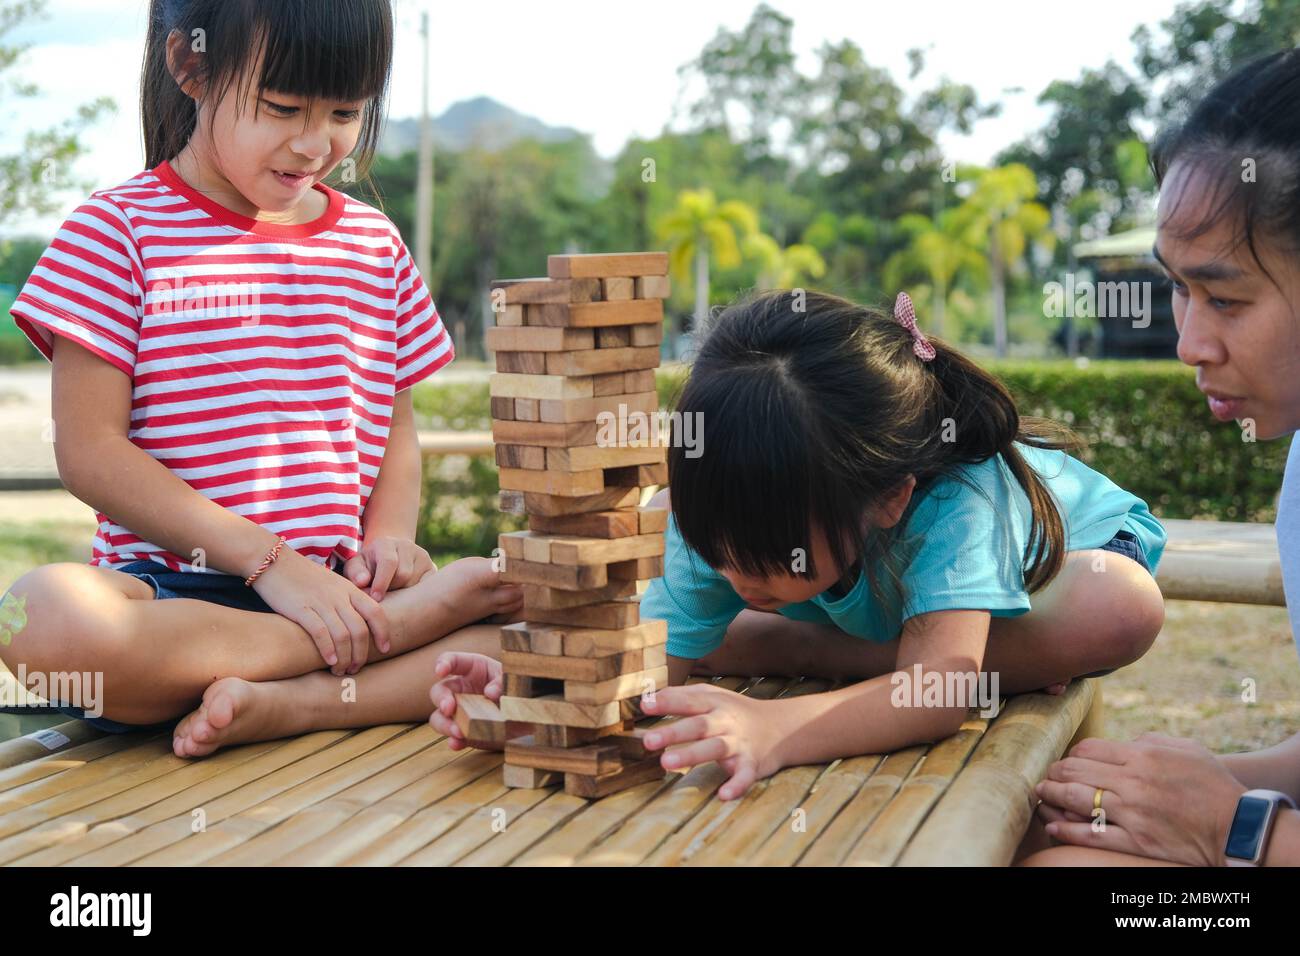 Excited kids and mom playing Jenga tower wooden block game together in the park. Happy family with children enjoying weekend activities together. Stock Photo